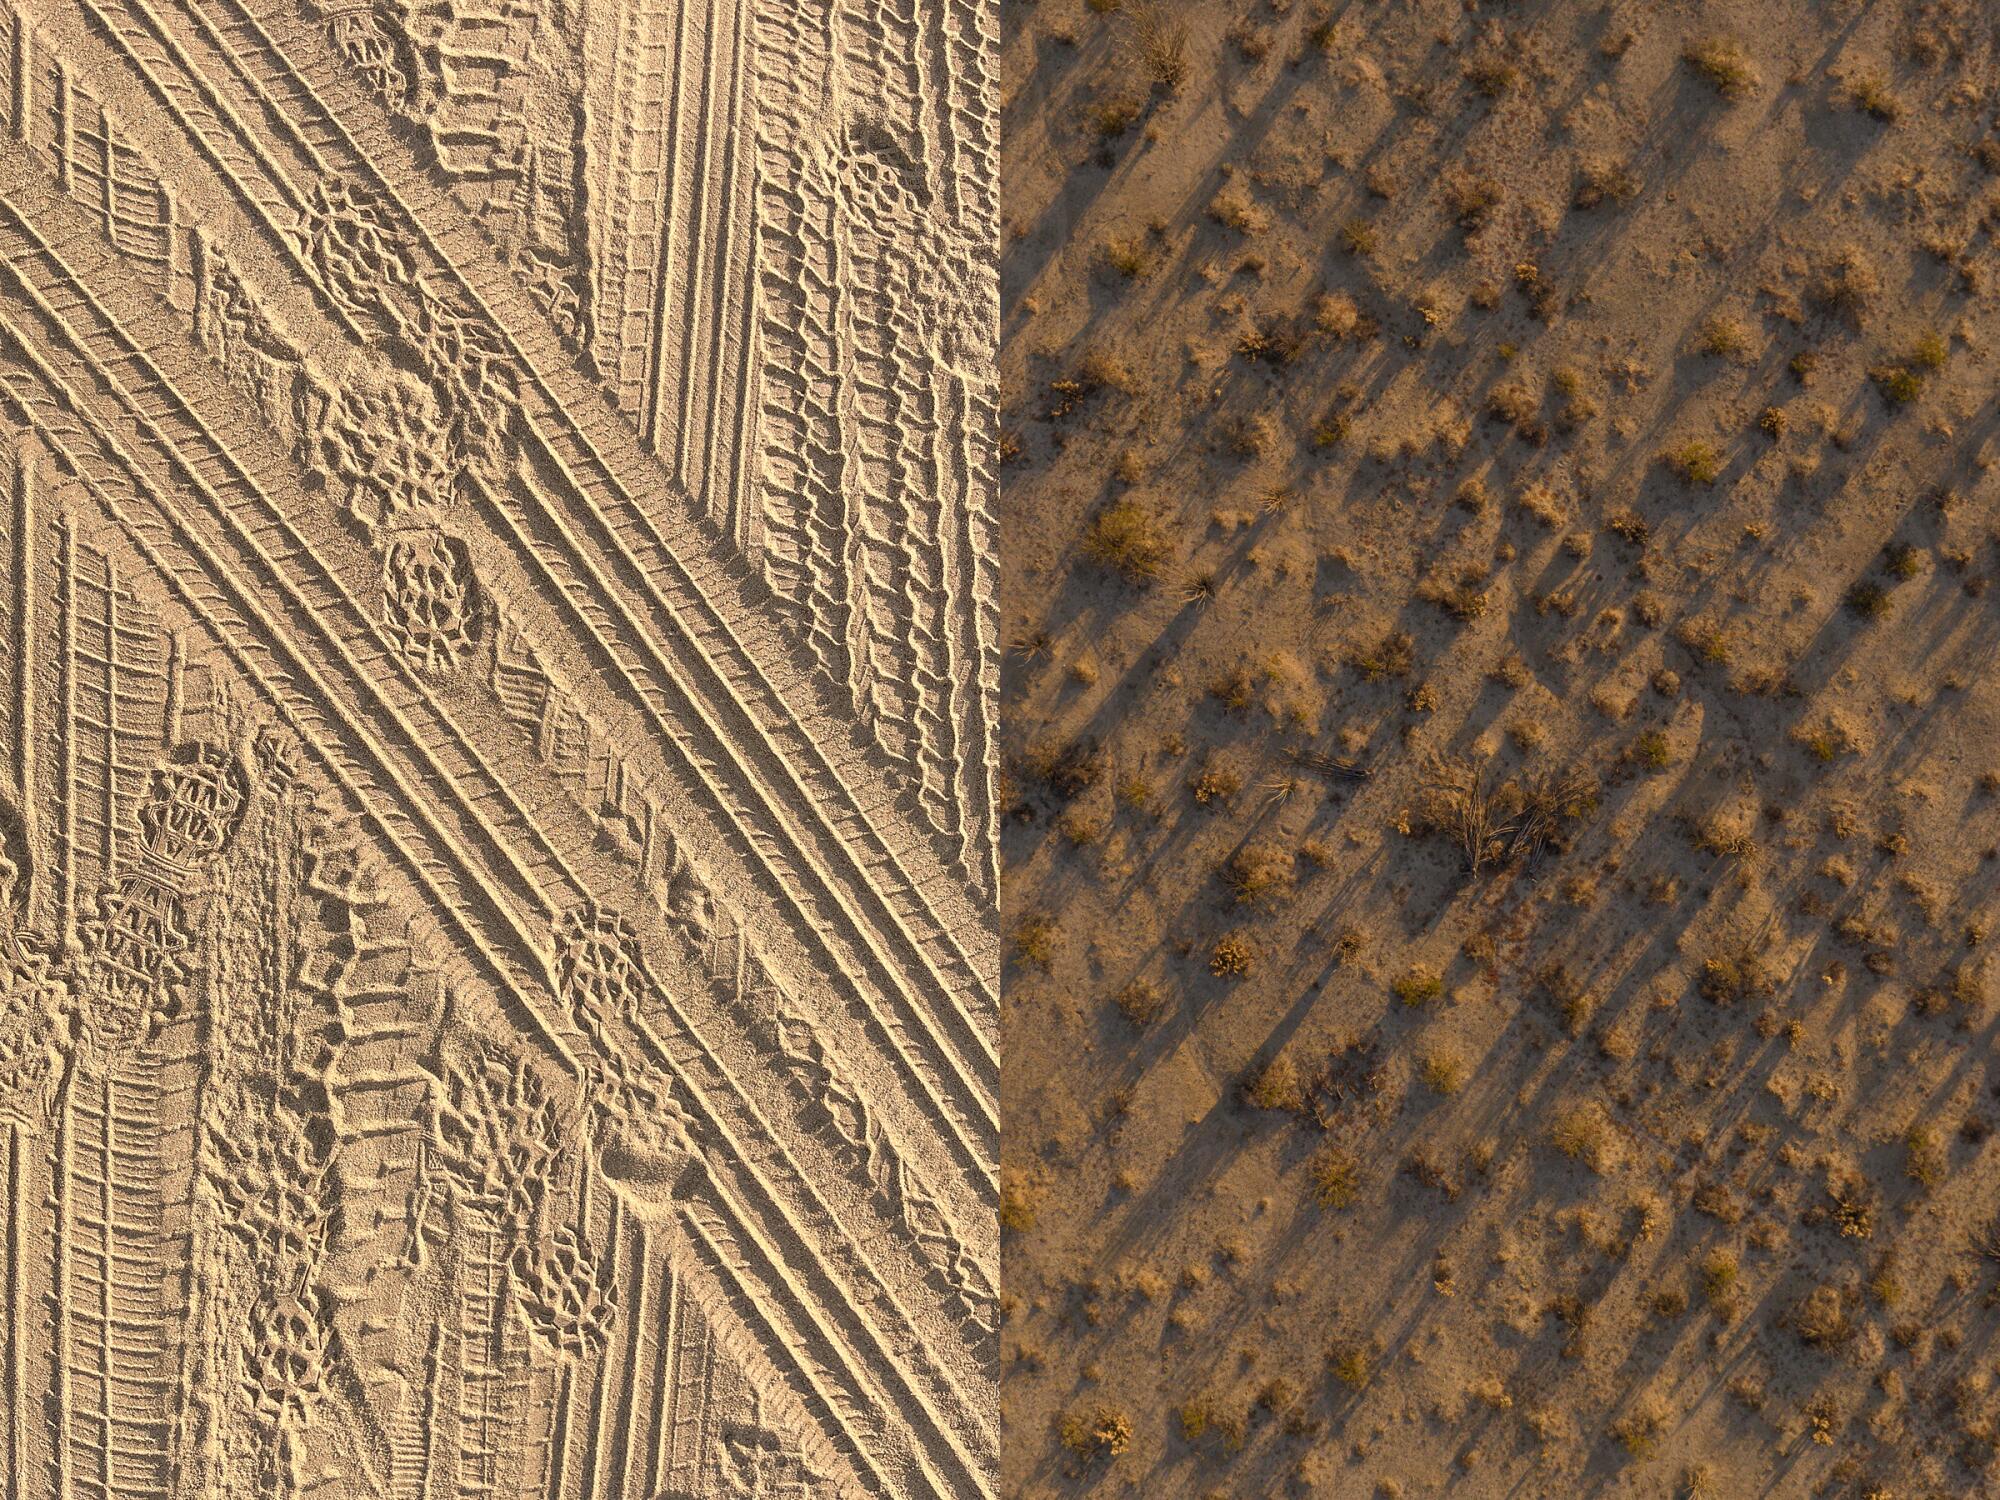 Two images side by side of footprints and tire tracks in the sand, left, and an overhead view of desert brush, right.